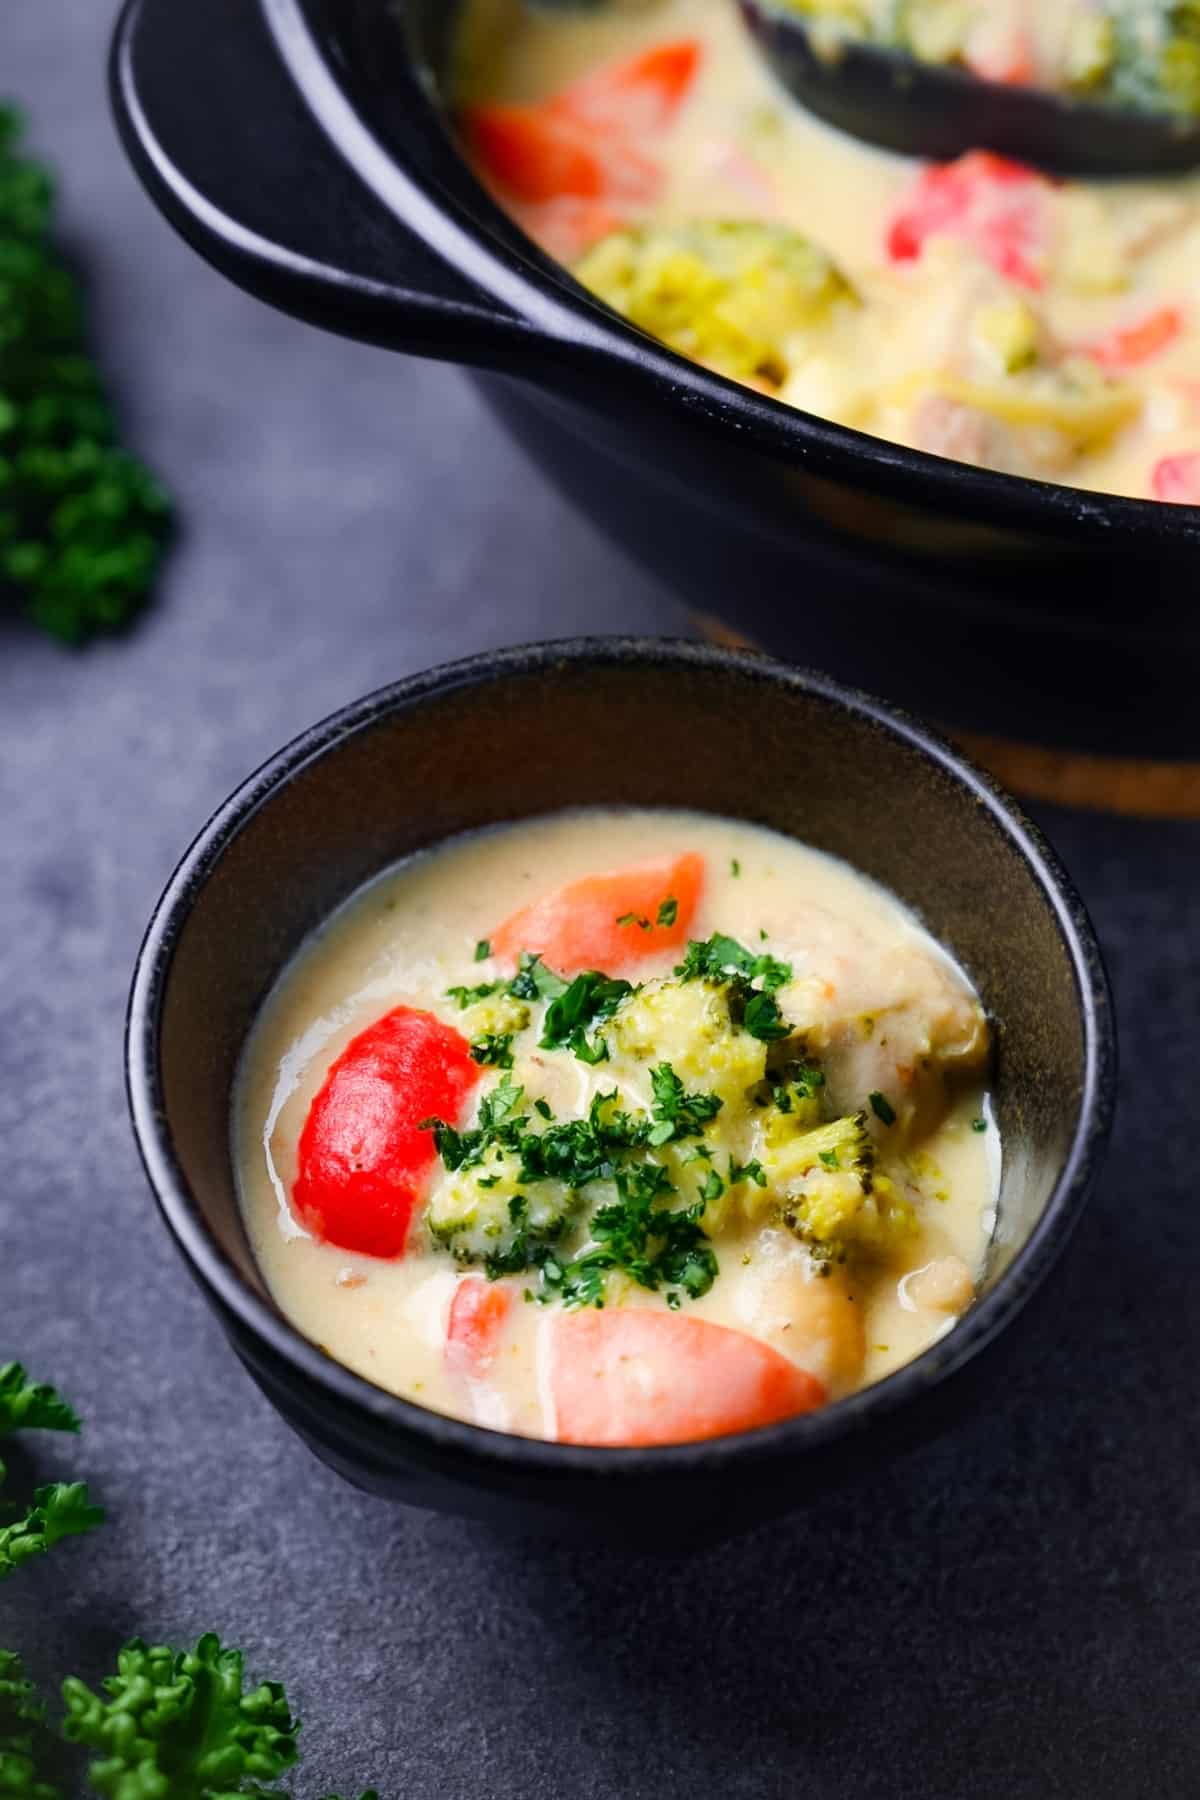 Japanese cream stew with chicken and vegetables